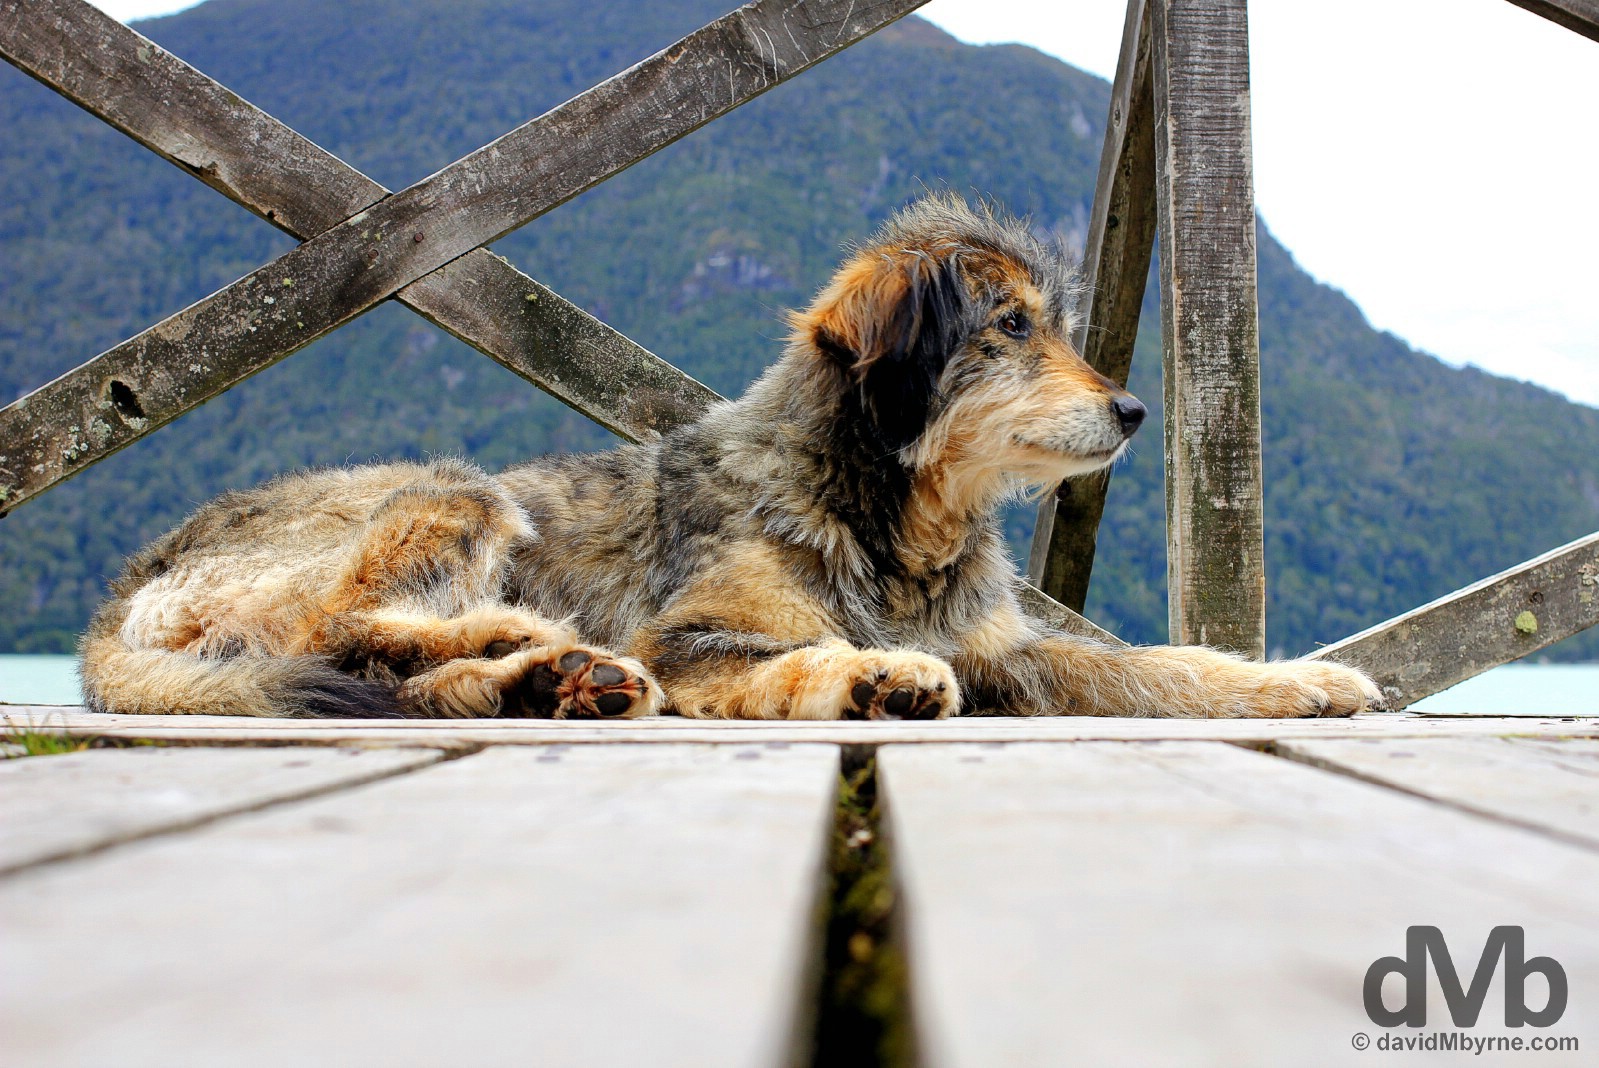 A shaggy dog resting on the boardwalks of Caleta Tortel in Aysen, Chile. October 29, 2015.